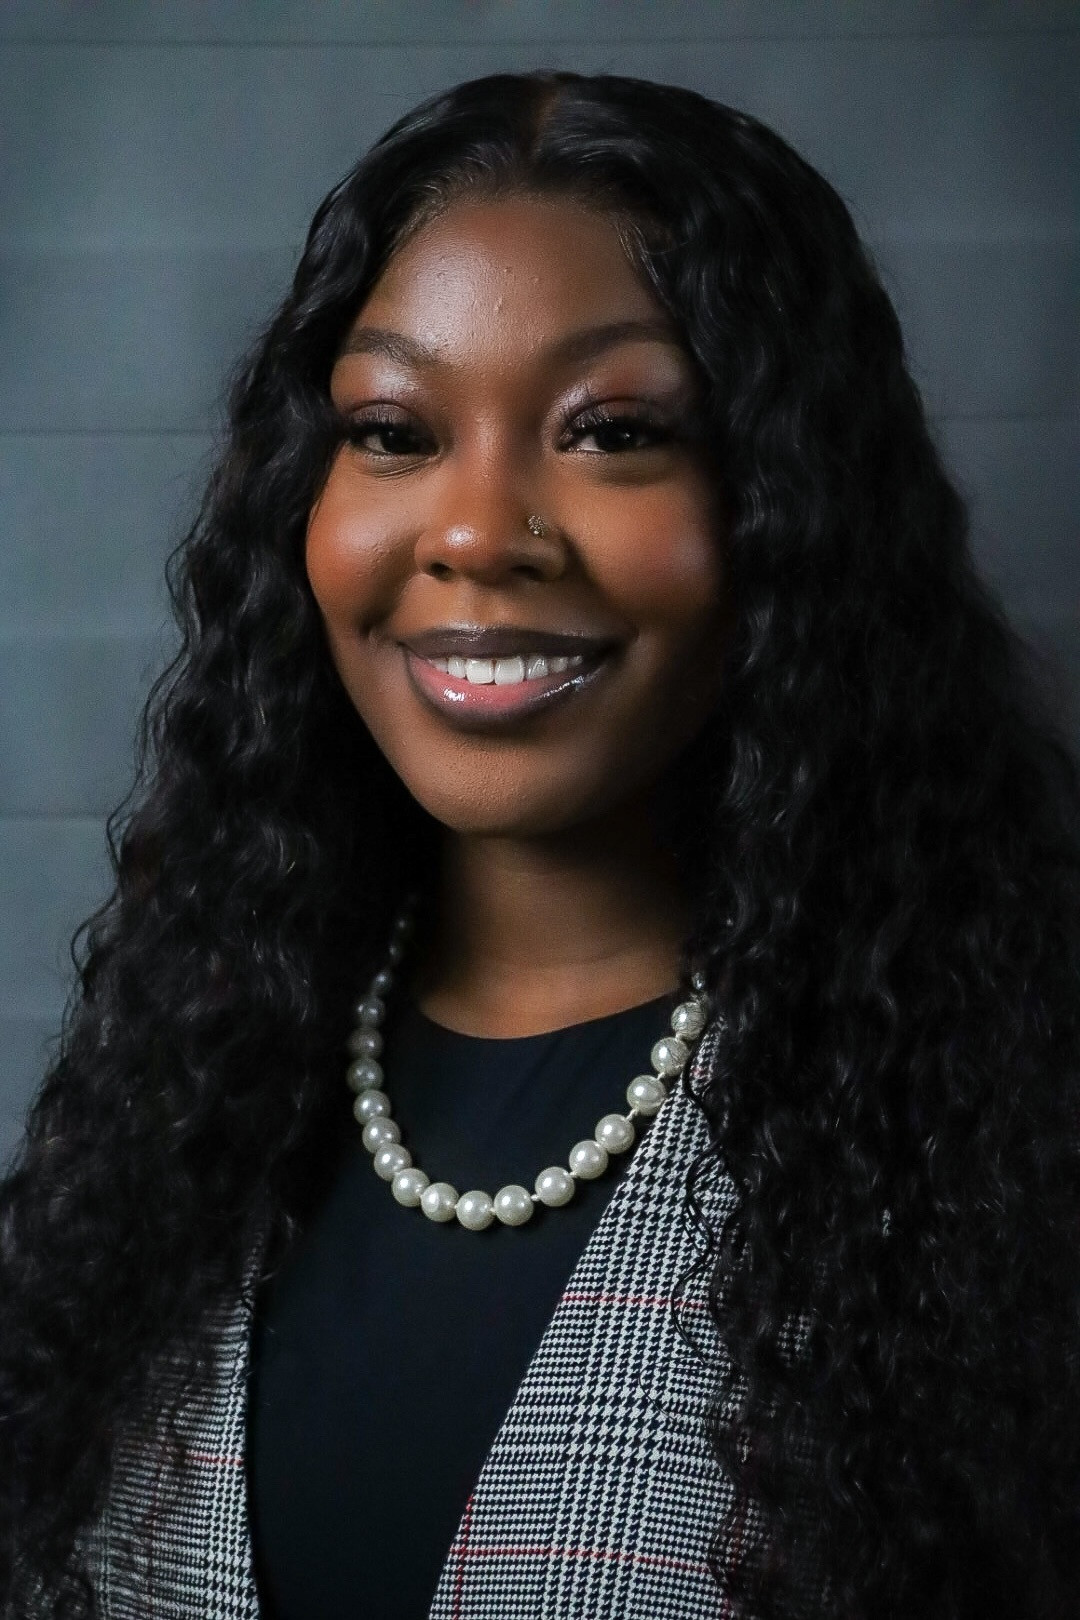 This is a photo of JADA THOMAS. This professional services JACKSONVILLE, FL 32202 and the surrounding areas.